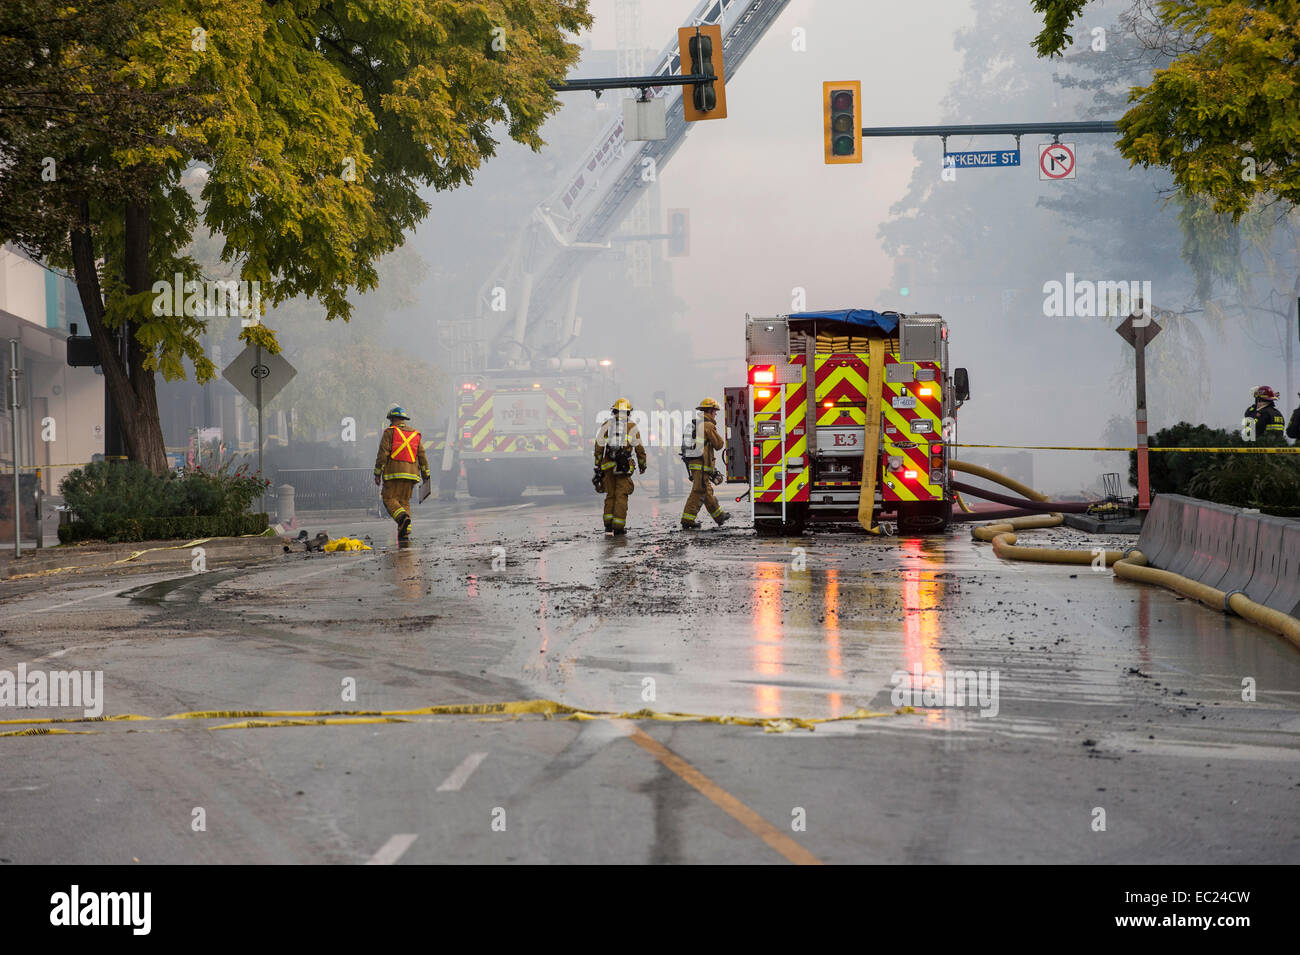 Firemen and emergency fire vehicles responding to a fire. Stock Photo